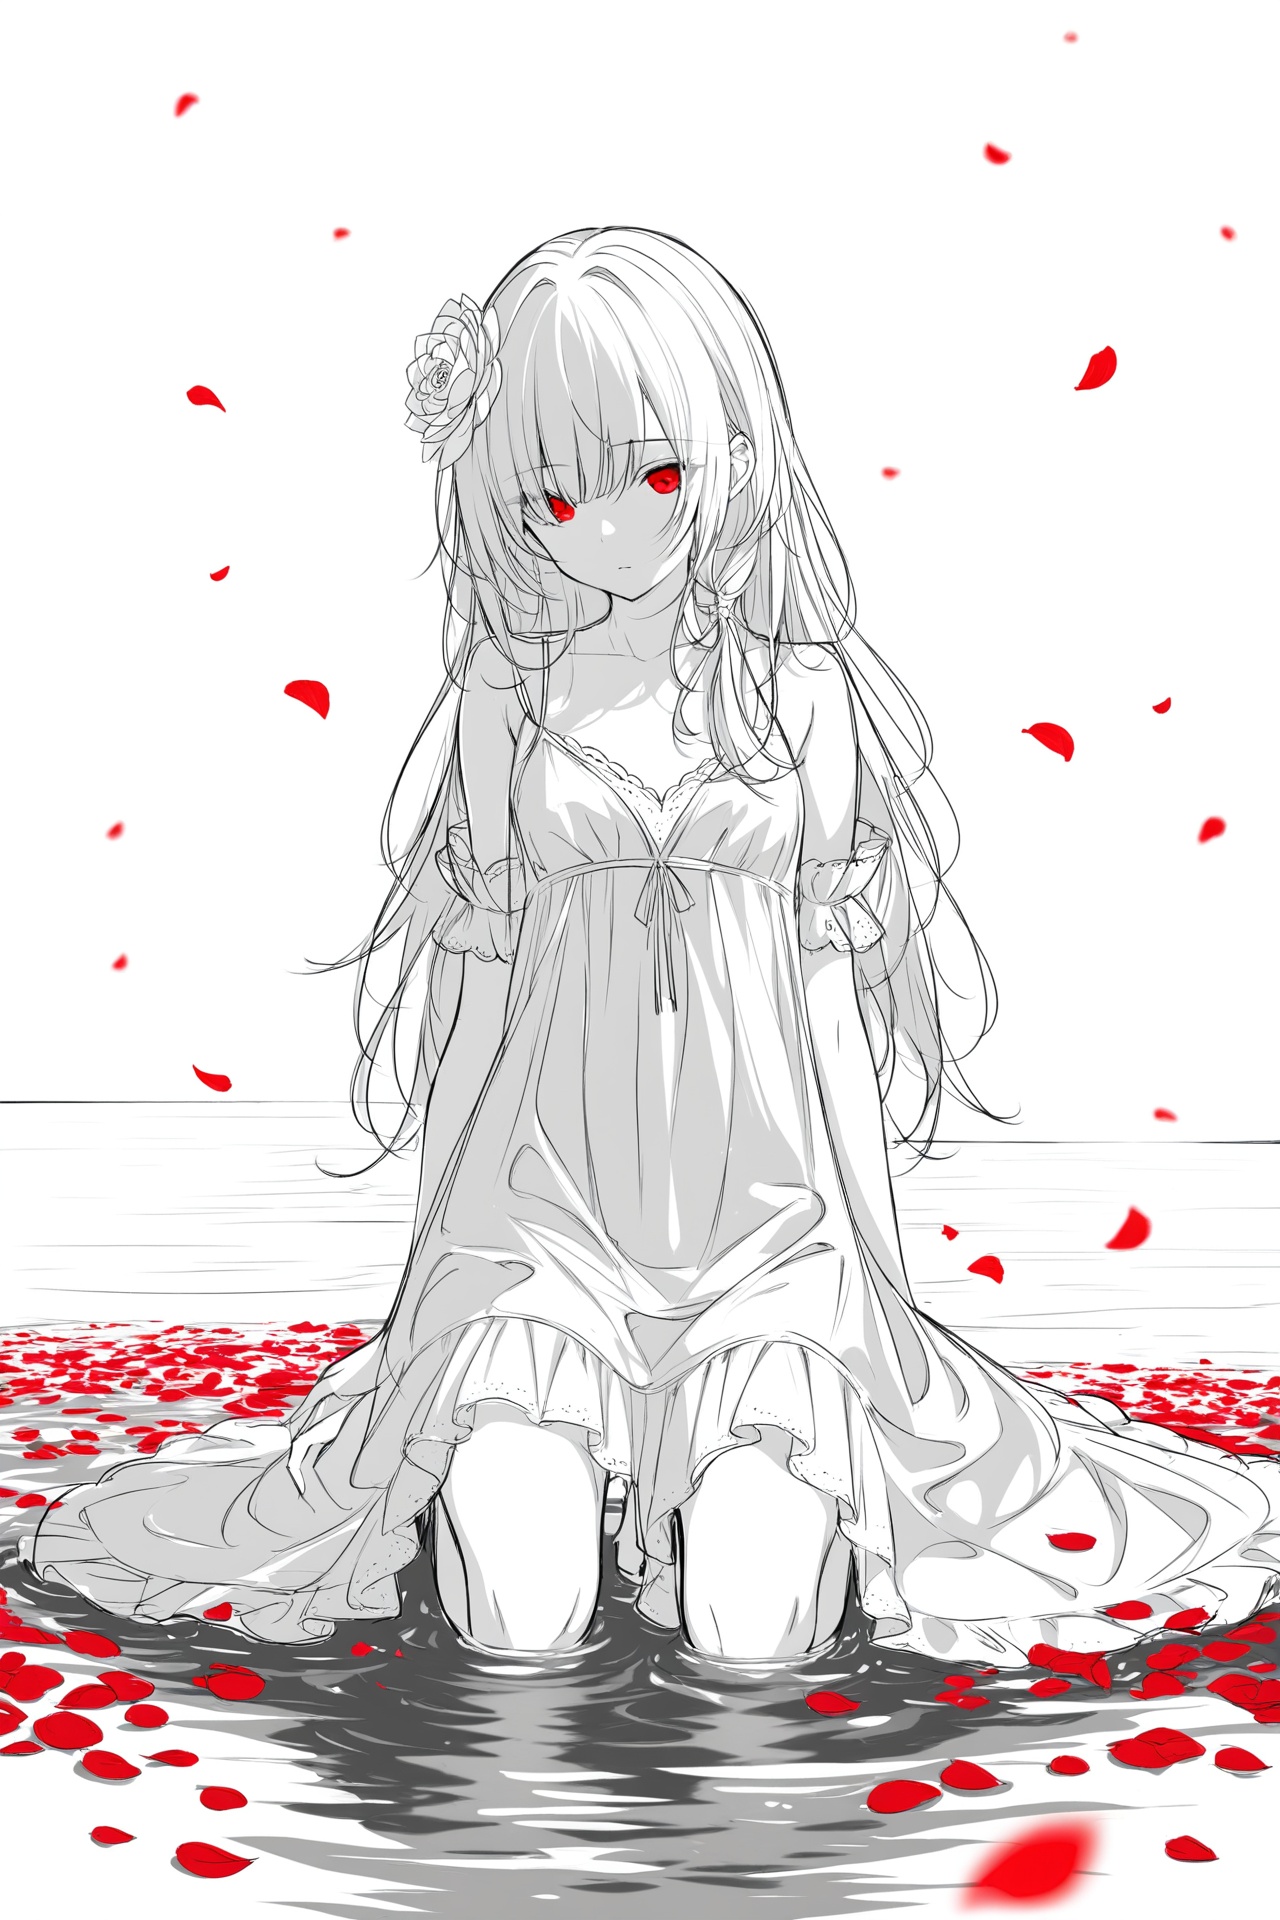 (masterpiece),(best quality),illustration,ultra detailed,hdr,Depth of field,(colorful),1girl,red eyes,white long translucent night gown,expressionless,(white hair),hair cover one eye,long hair,red hair flower,kneeling on lake,blood,(plenty of red petals:1.35),(white background:1.5),(English text),greyscale,monochrome,greyscale,monochrome,sketch,